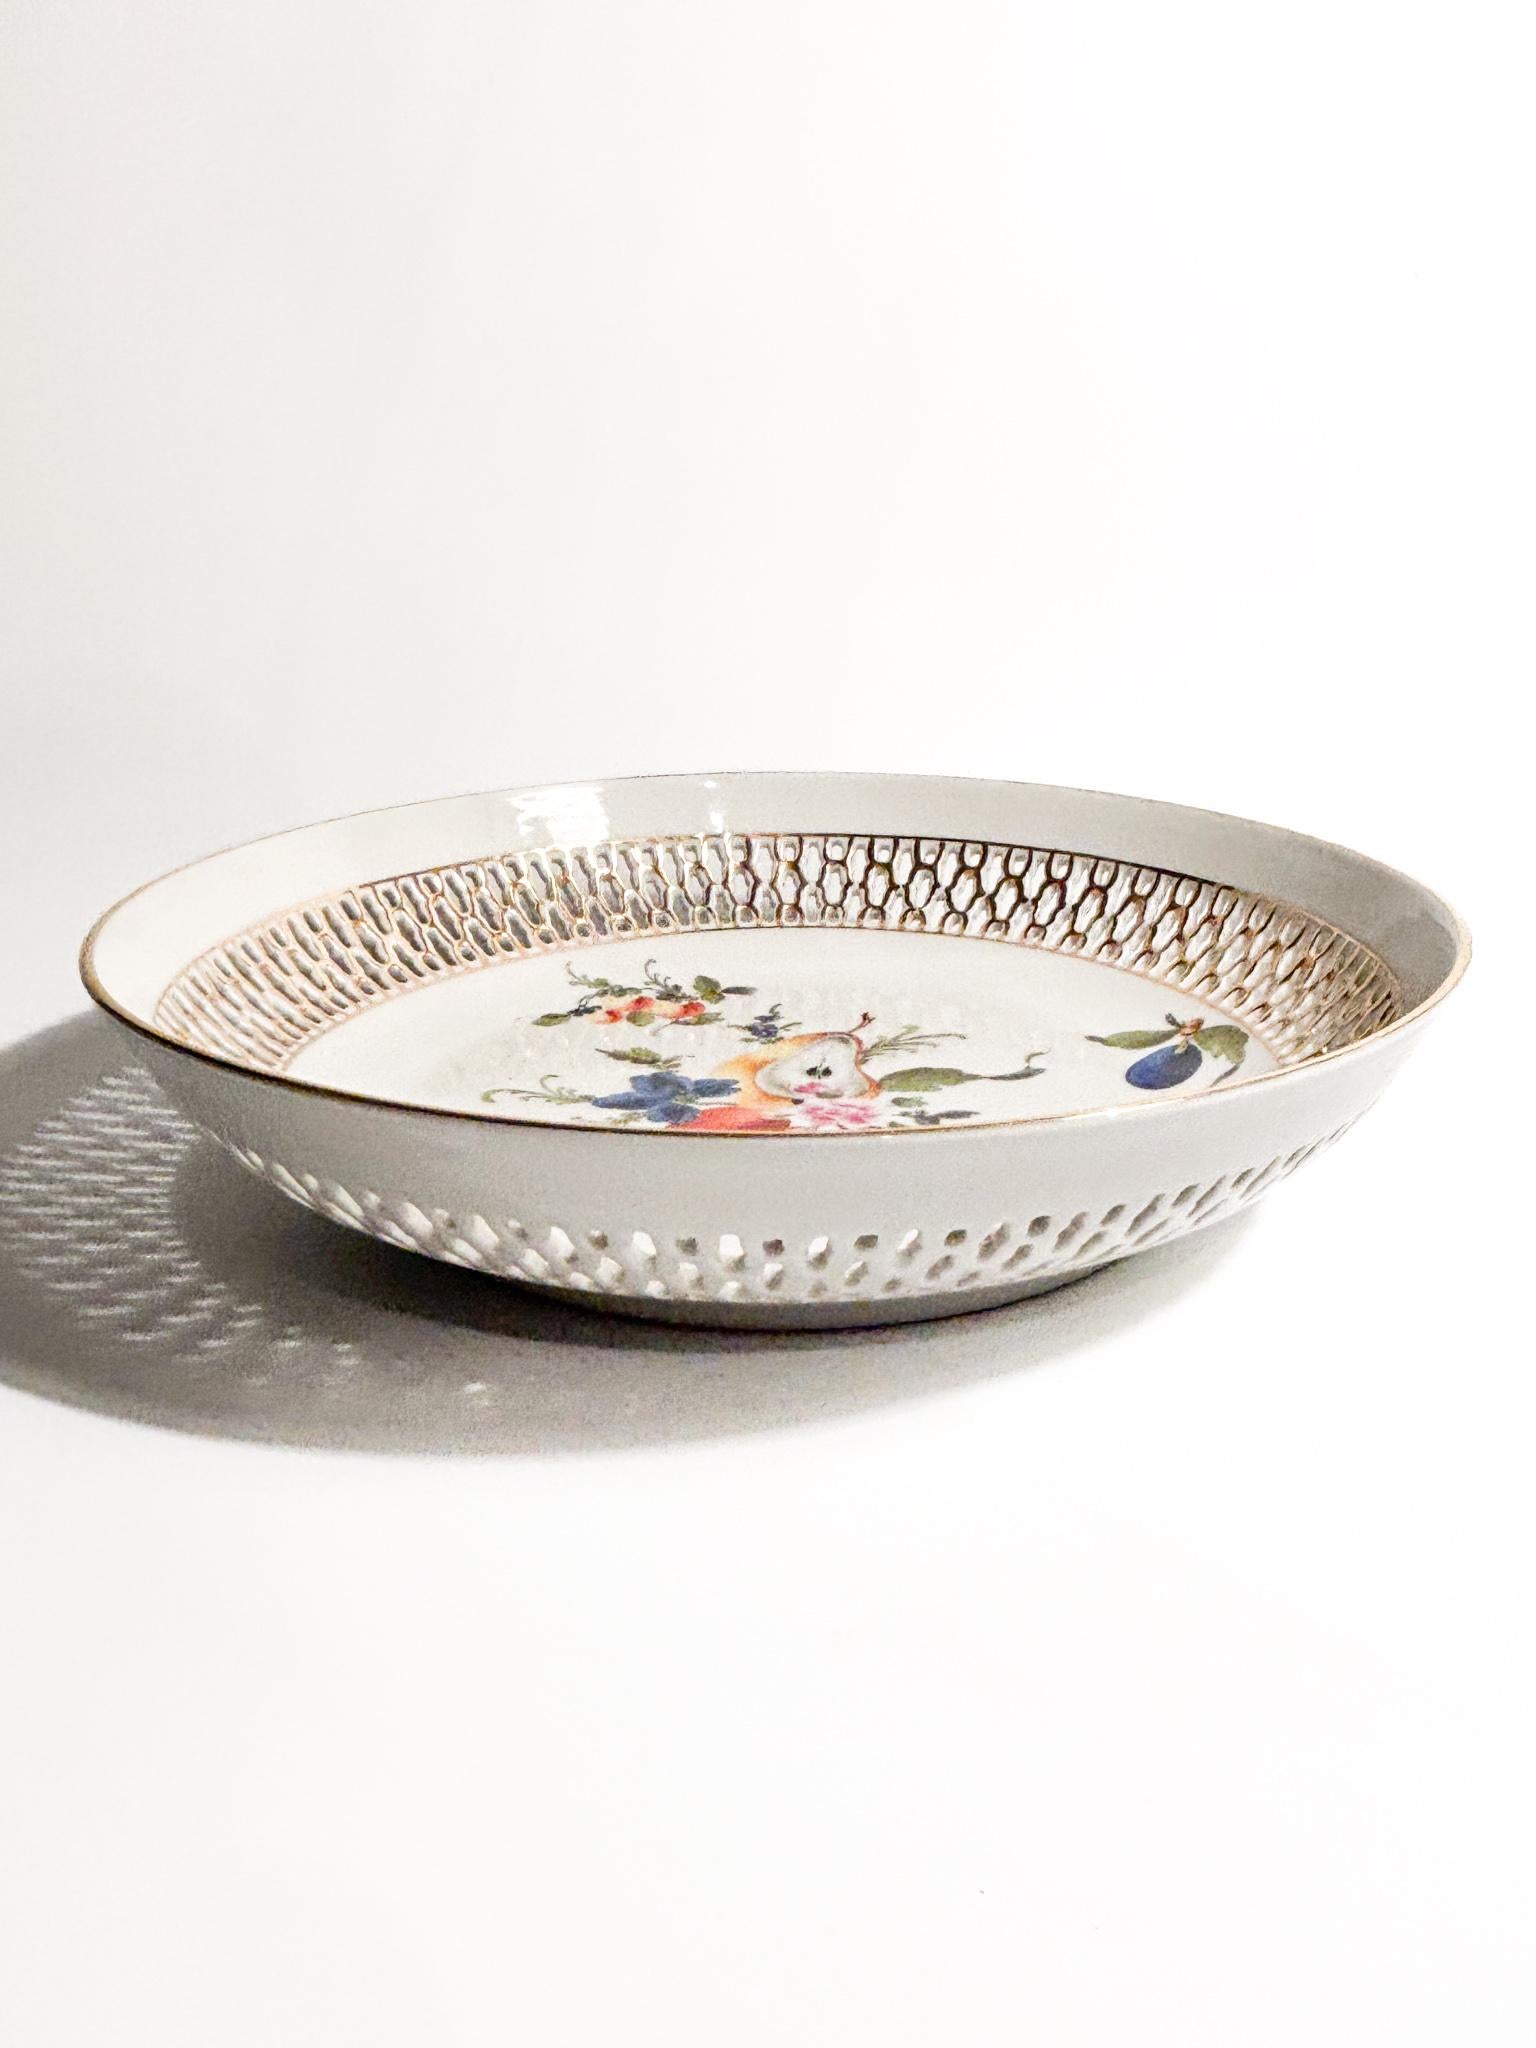 Mid-20th Century Herend Porcelain Centerpiece with Fruit Motif from the 1960s